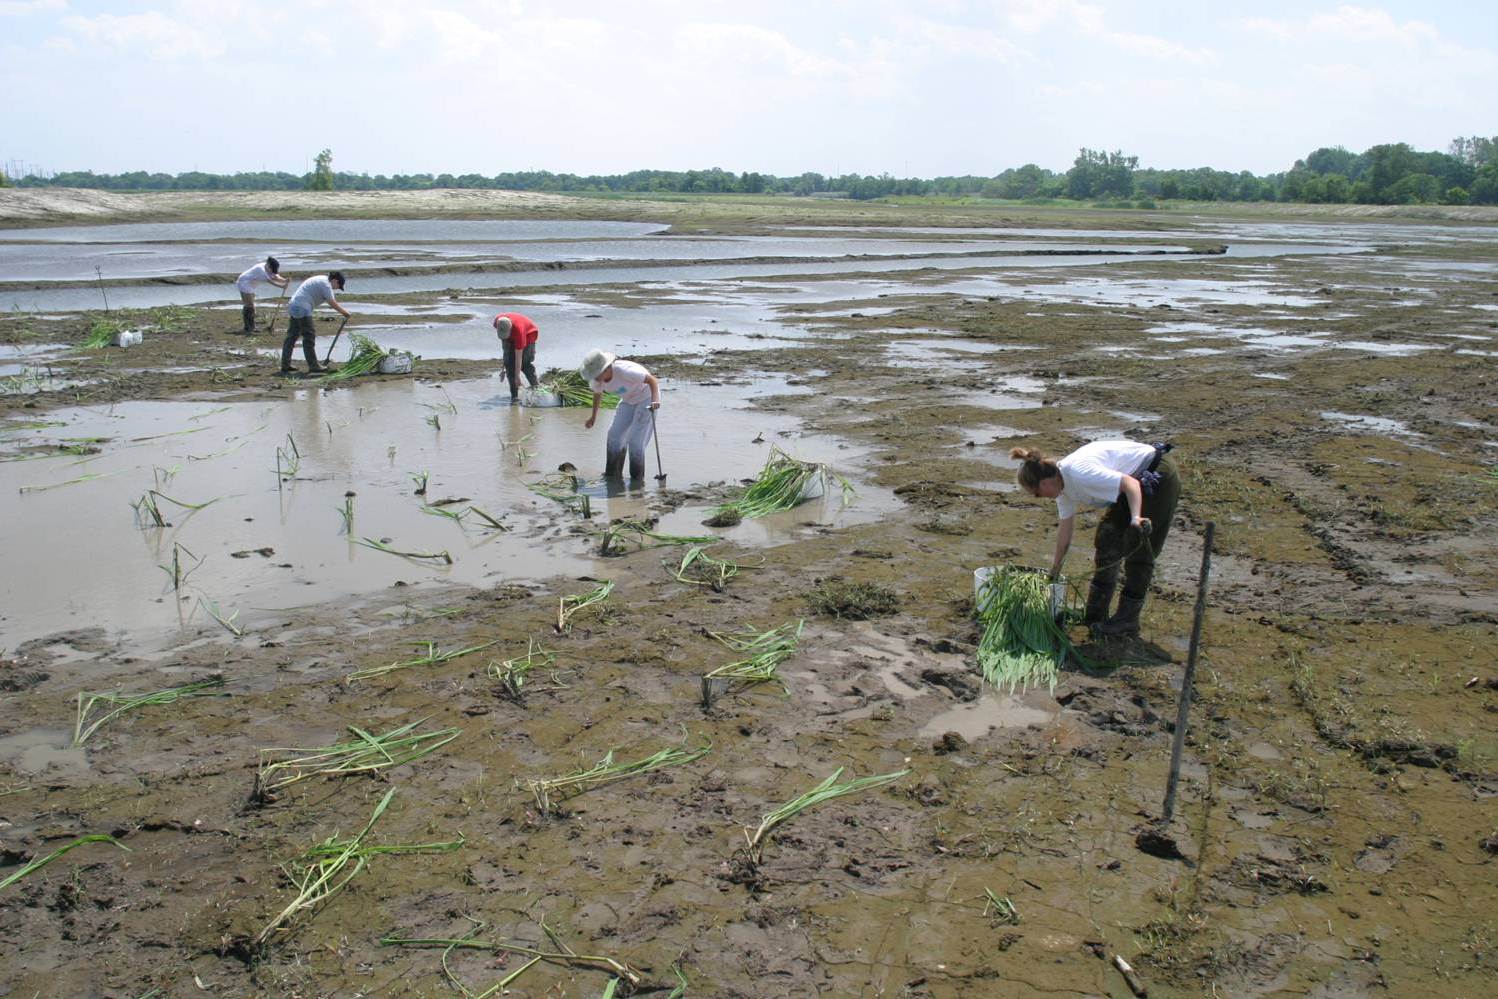 A crew of workers adds plants ro a wetland area